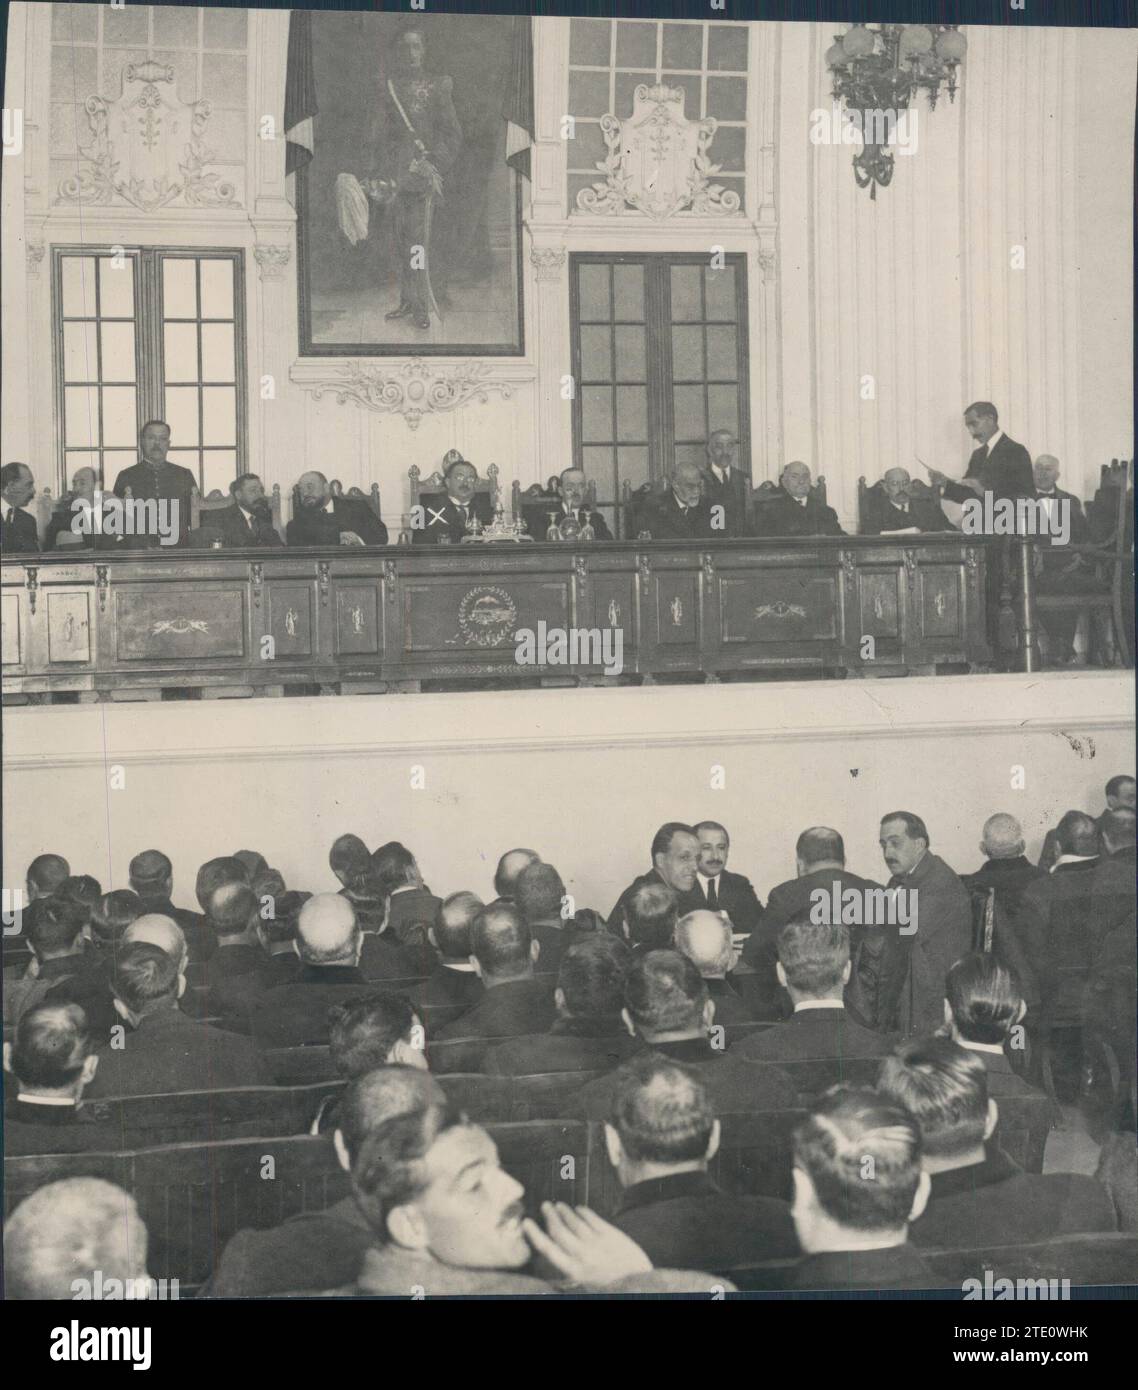 10/31/1919. Madrid. Assembly of Municipal Officials. Inauguration Session, Chaired by the Mayor, Mr. Garrido (X), at the registered office of the Railway Employees. Credit: Album / Archivo ABC / Julio Duque Stock Photo